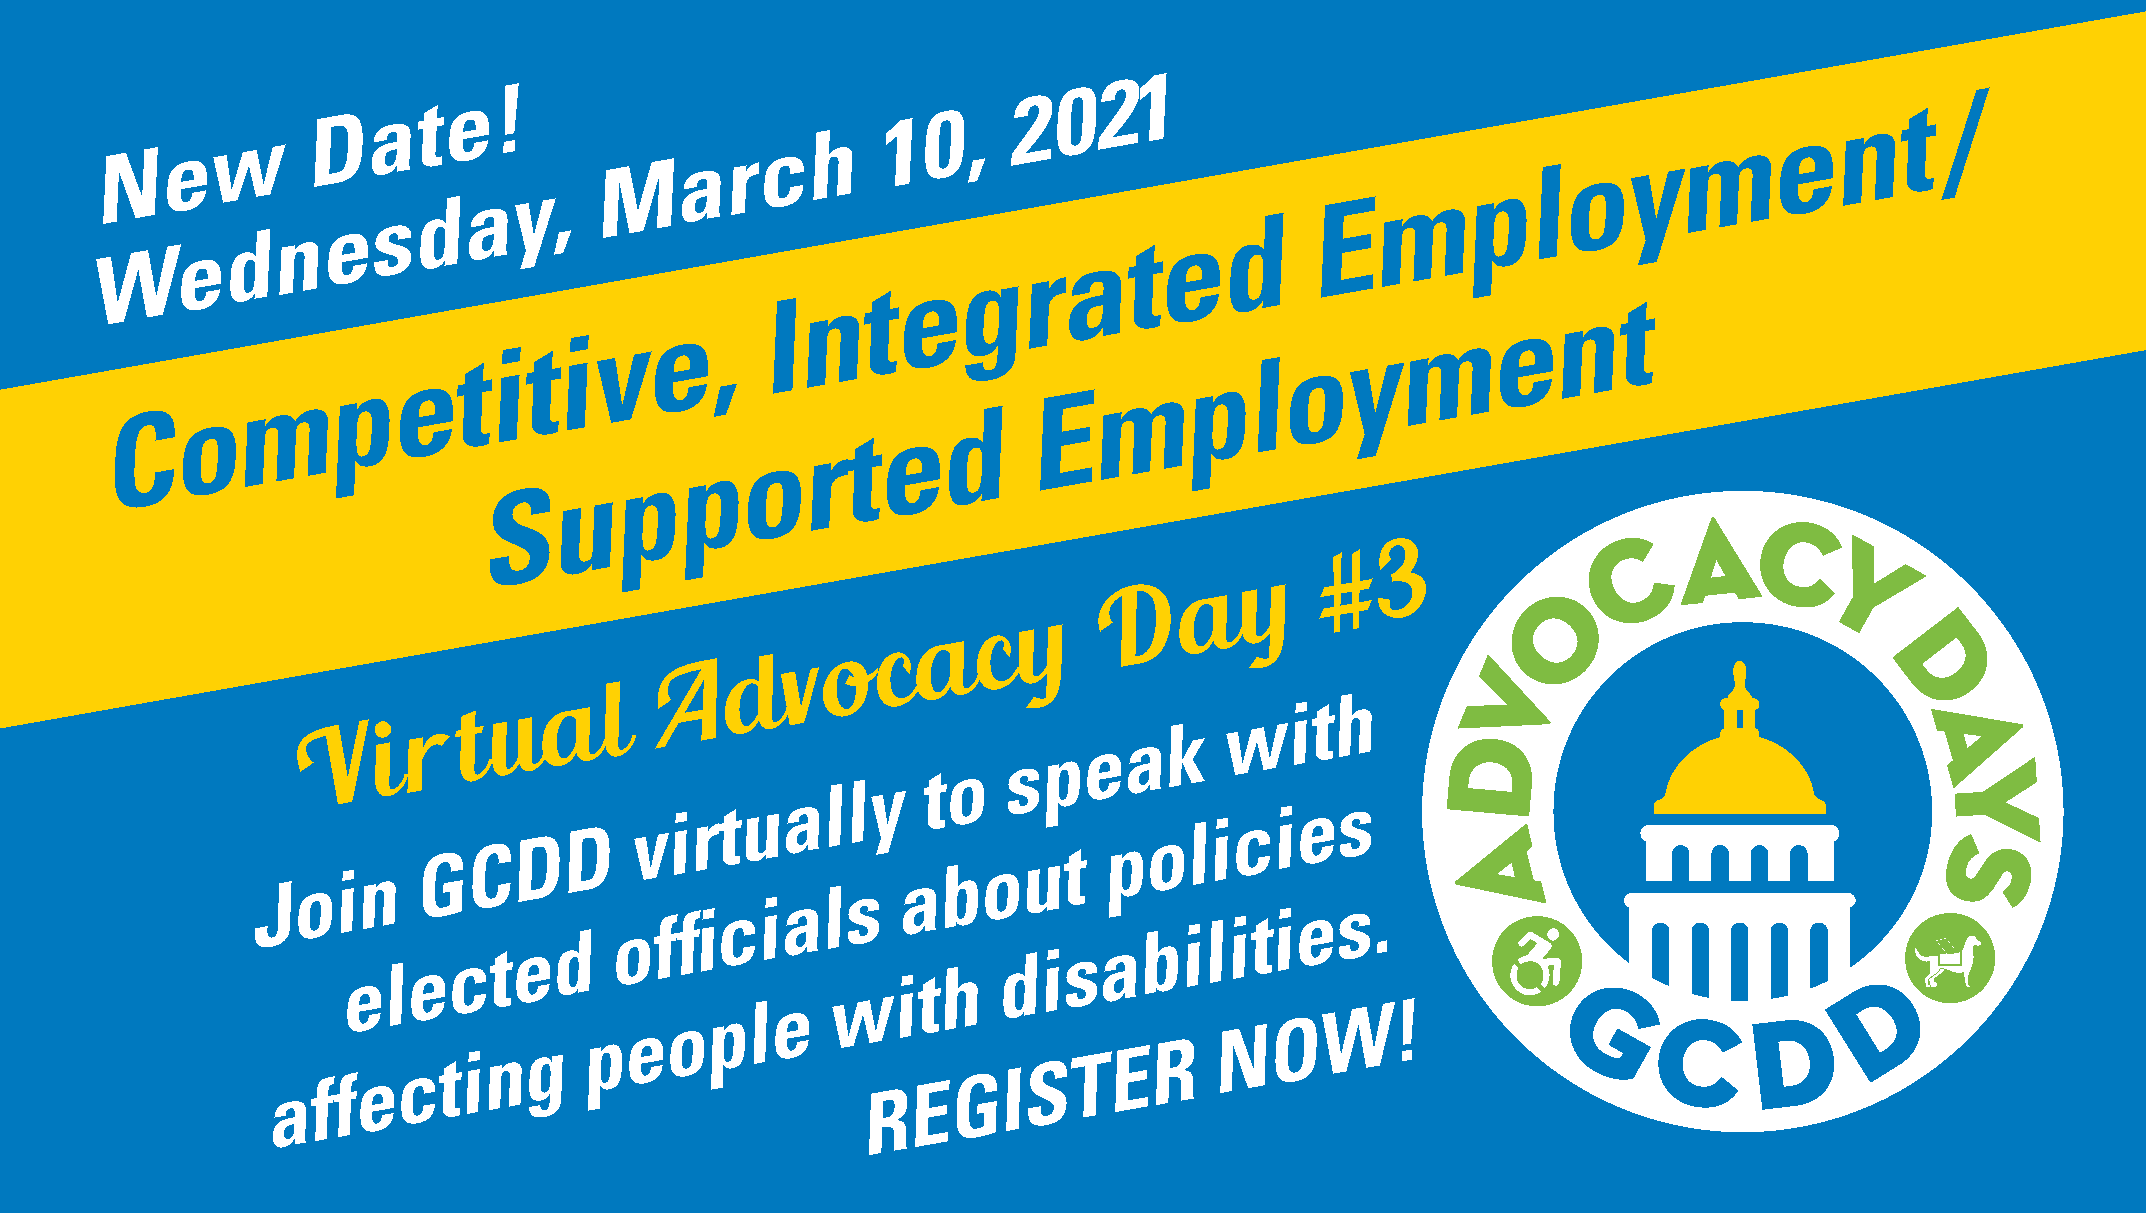 Blue banner with New Date! Wednesday, March 10, 2021 above the words Competitive, Integrated Employment/Supported Employment on a yellow band on a dark blue background